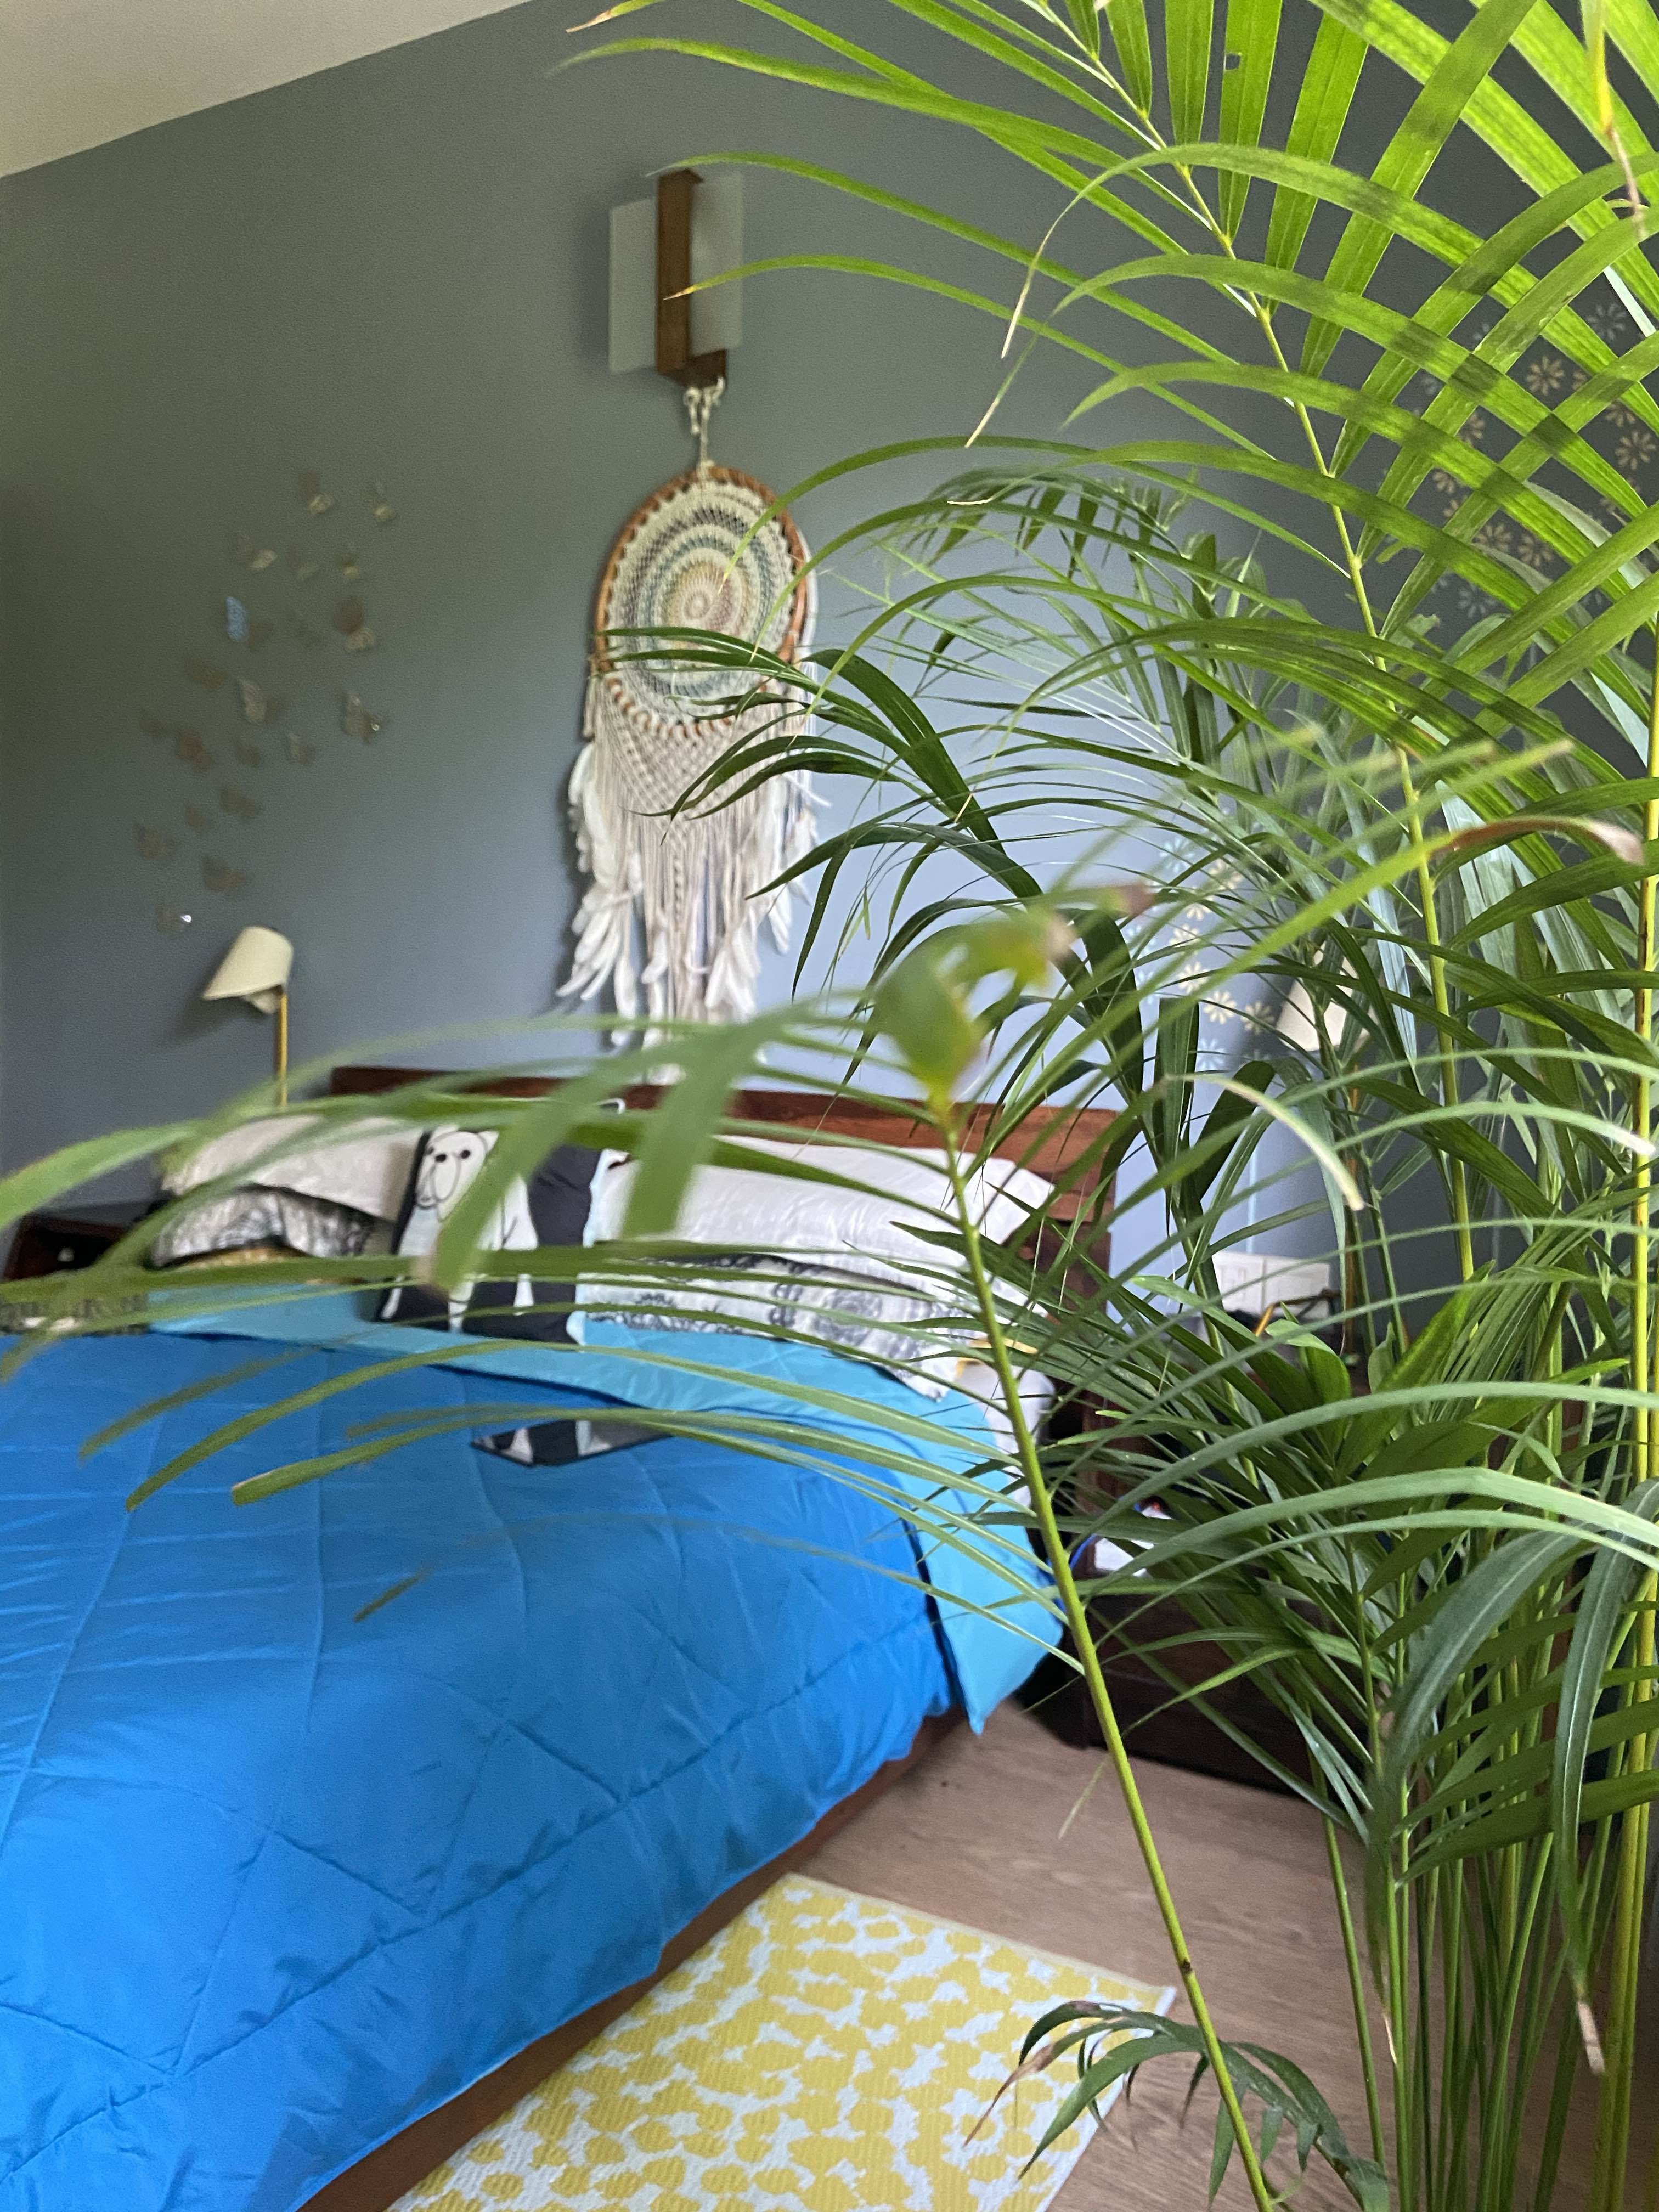 Green,Blue,Majorelle blue,Plant,Architecture,Grass,Leaf,Tree,Room,Grass family